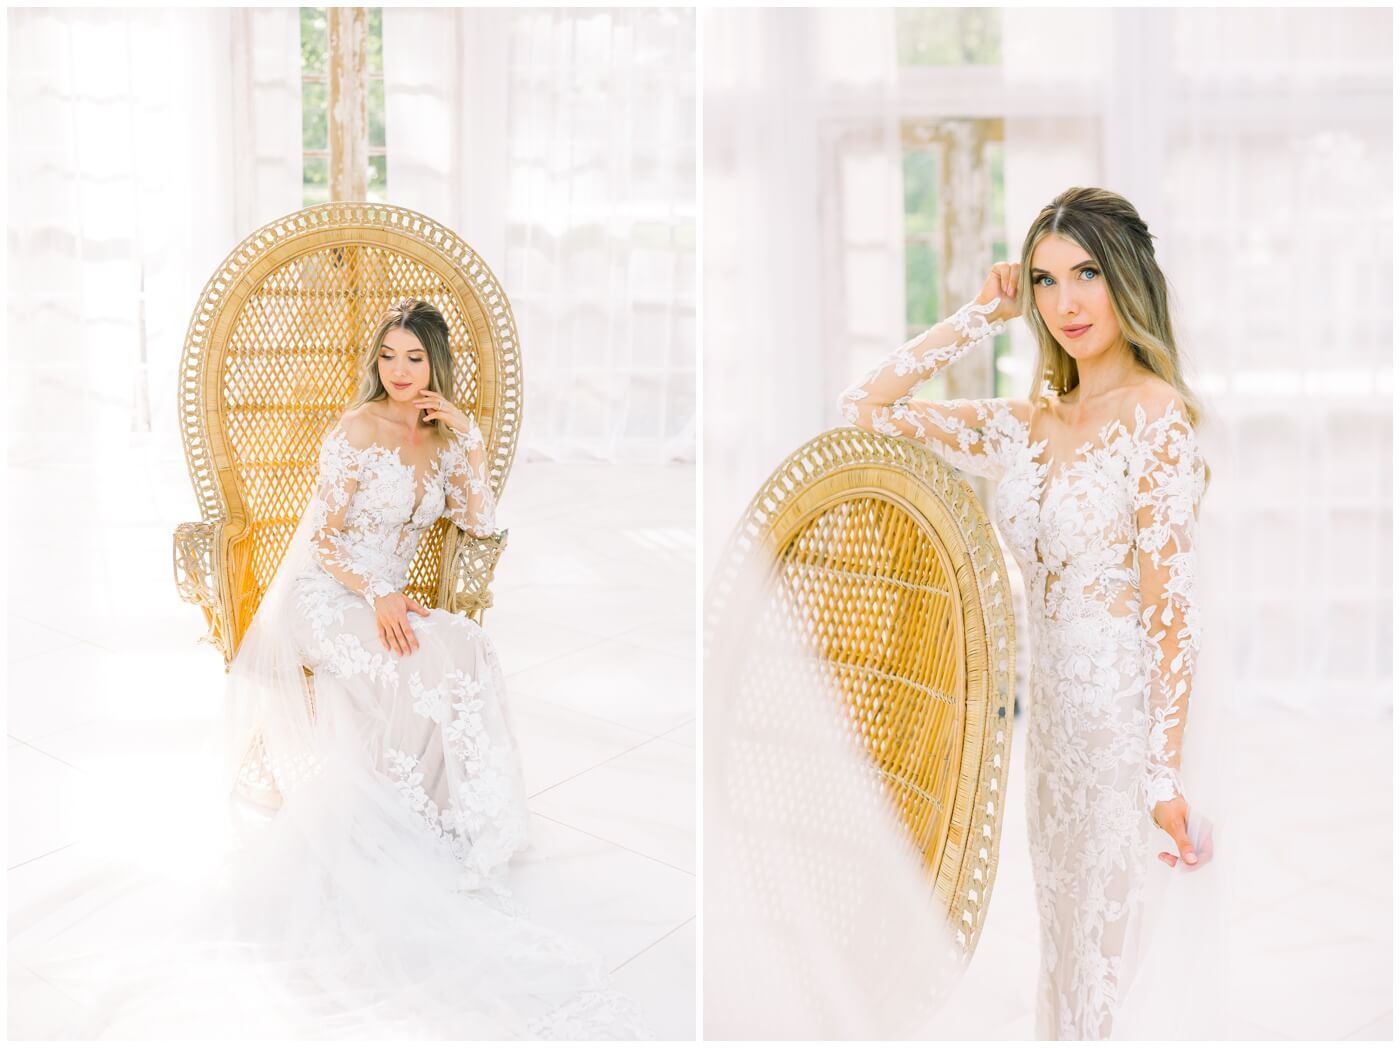 Houston wedding photographer | A bride sits in a woven chair during her bridal session